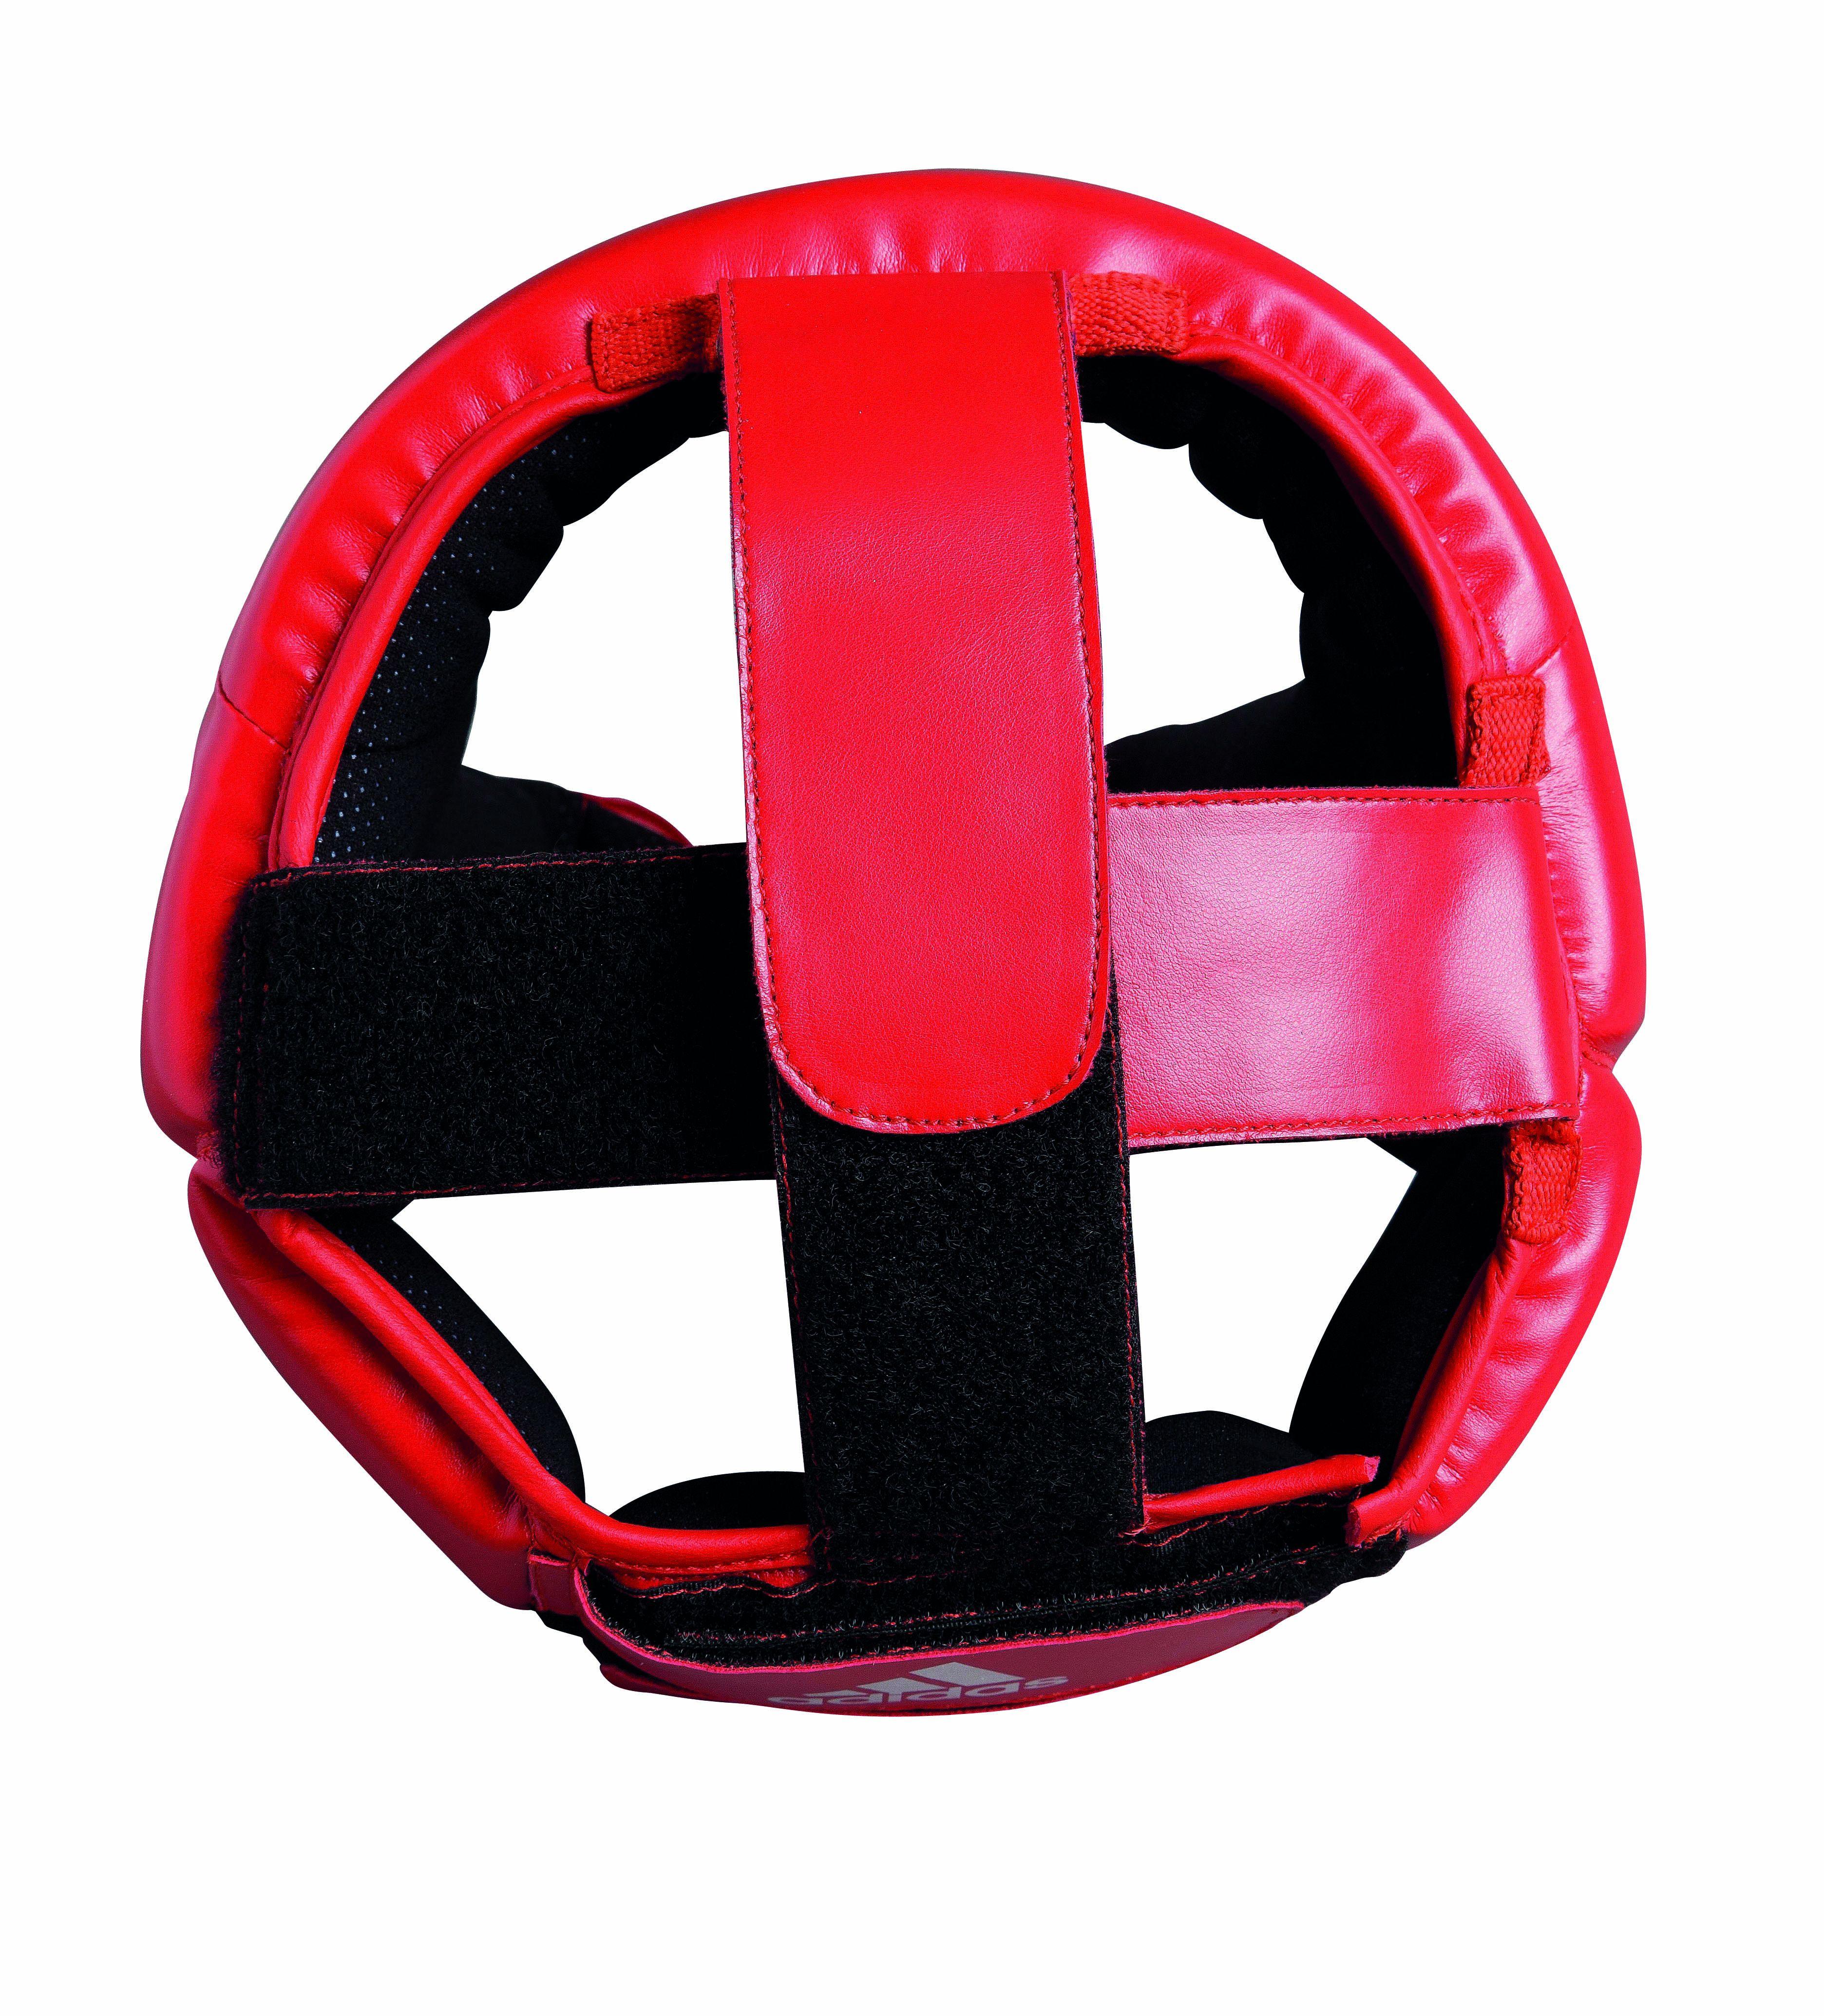 Head guard Boxing,  Best boxing head guard, boxing head guard uk, boxing head guard junior, boxing head guard kids, boxing head guard open face, Boxing head guard for sale, face guard boxing, boxing headgear, chin cheek head guard, Head guard Boxing Green and Gold, Ringmaster Sports Head guard, Ringmaster Sports Equipment, Ringmaster boxing Equipment,  Adidas Head guard Boxing, Adidas IBA (was AIBA) Licensed Head Guard, Ringmaster Boxing Equipment, Ringmaster Sports Equipment